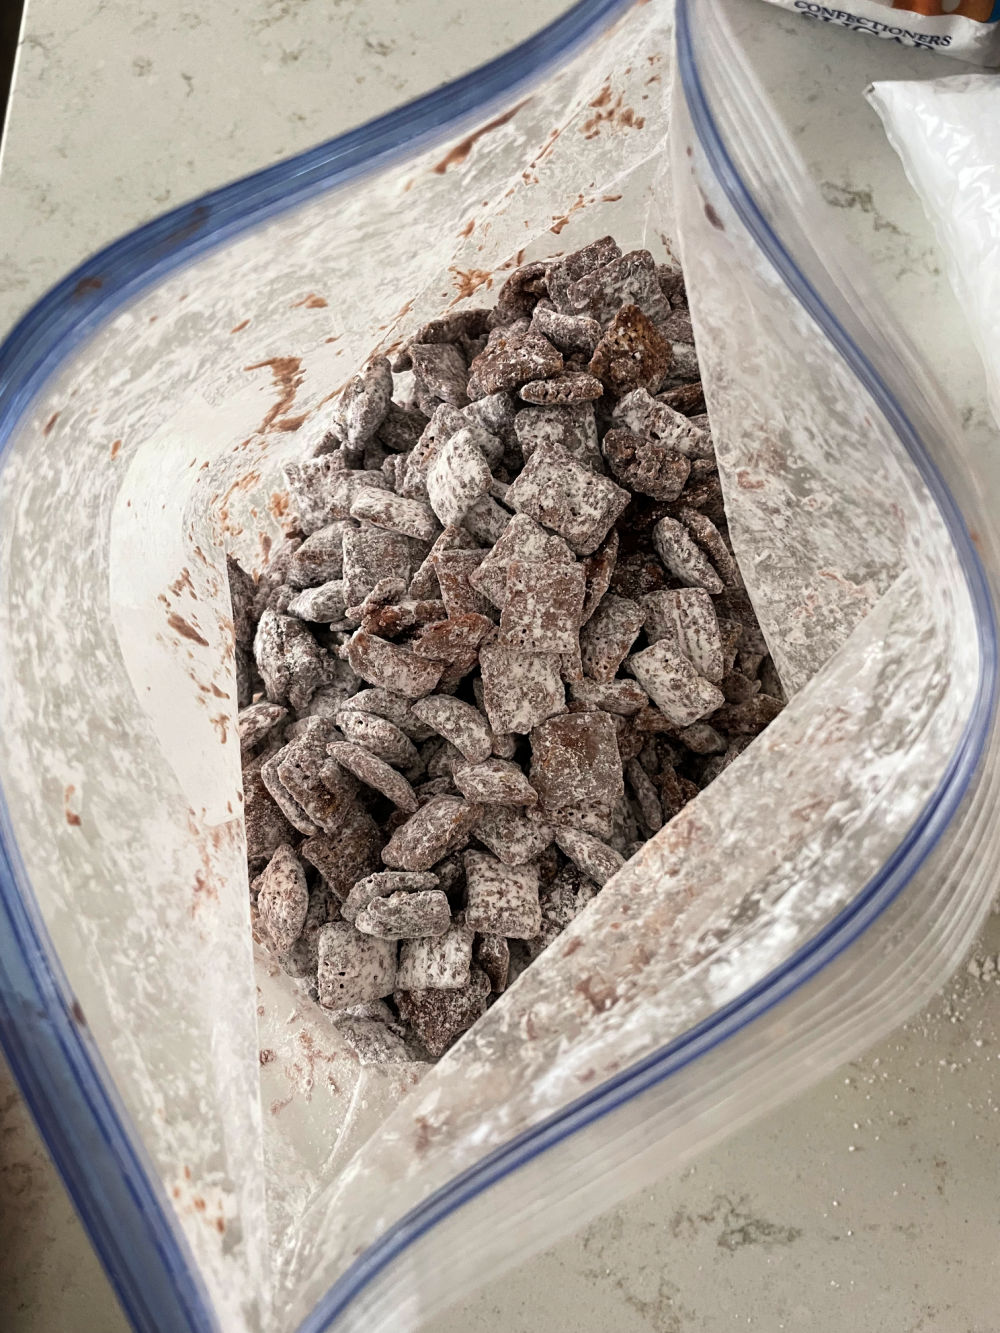 cereal coated with chocolate and powdered sugar in a plastic bag